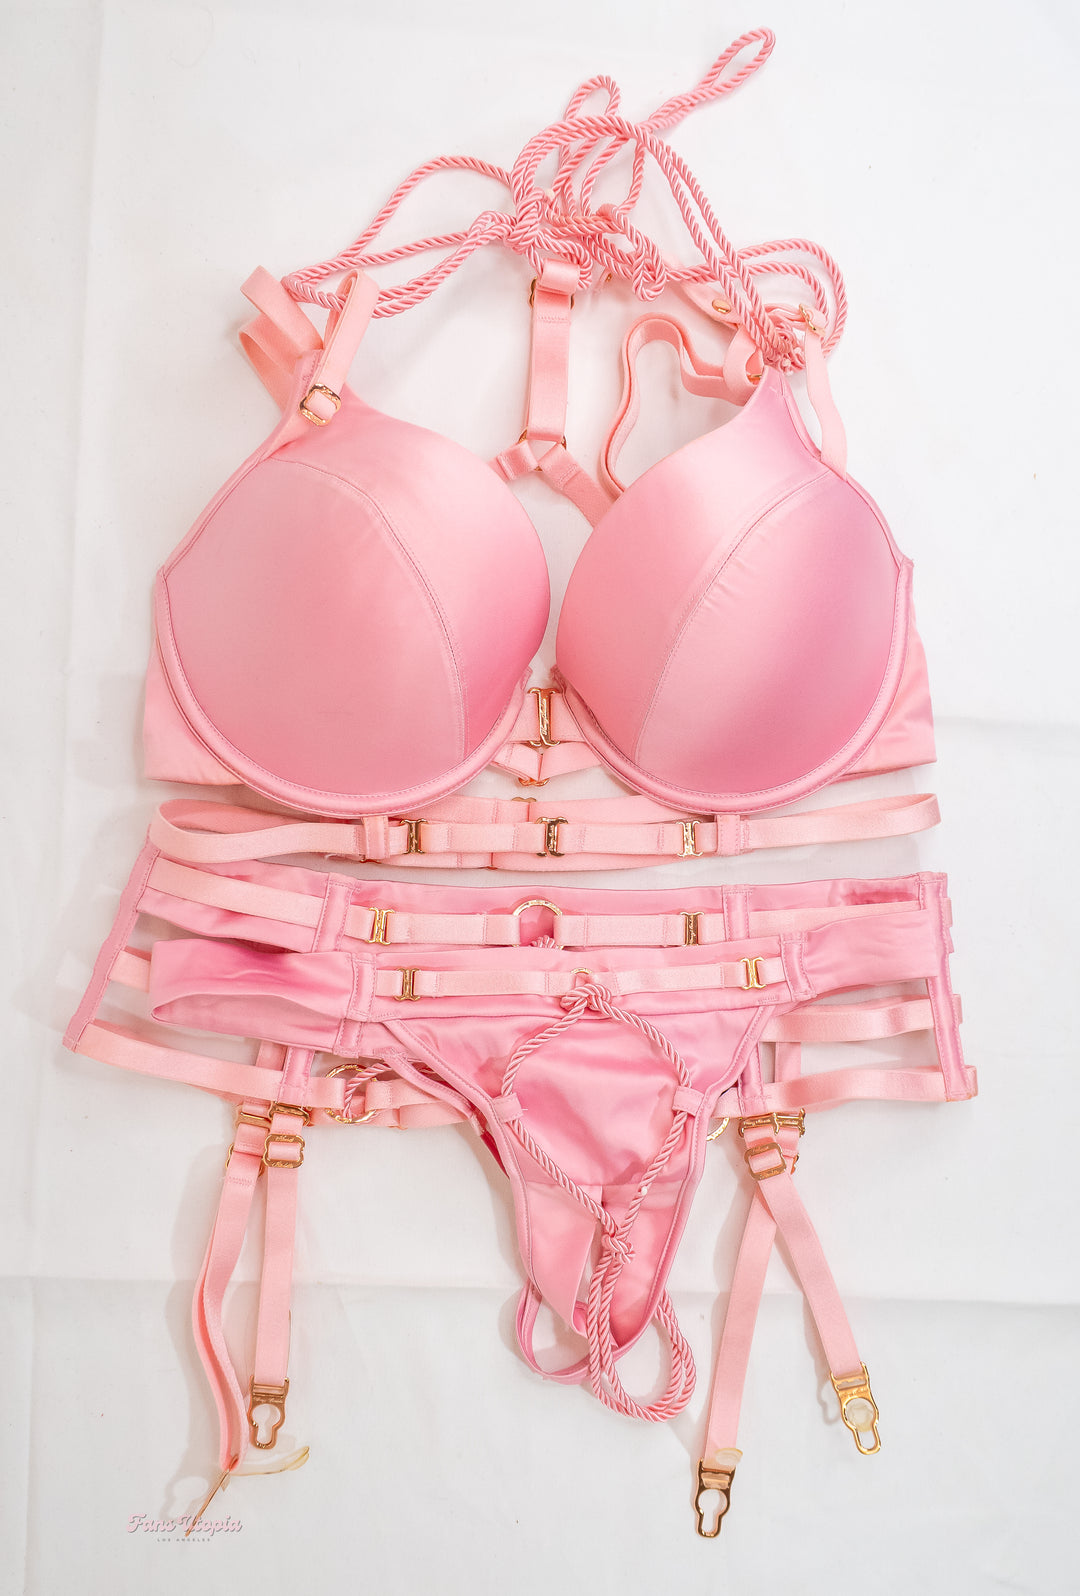 Joanna Angel Pink Rope HB Crotchless Lingerie Set - FANS UTOPIA